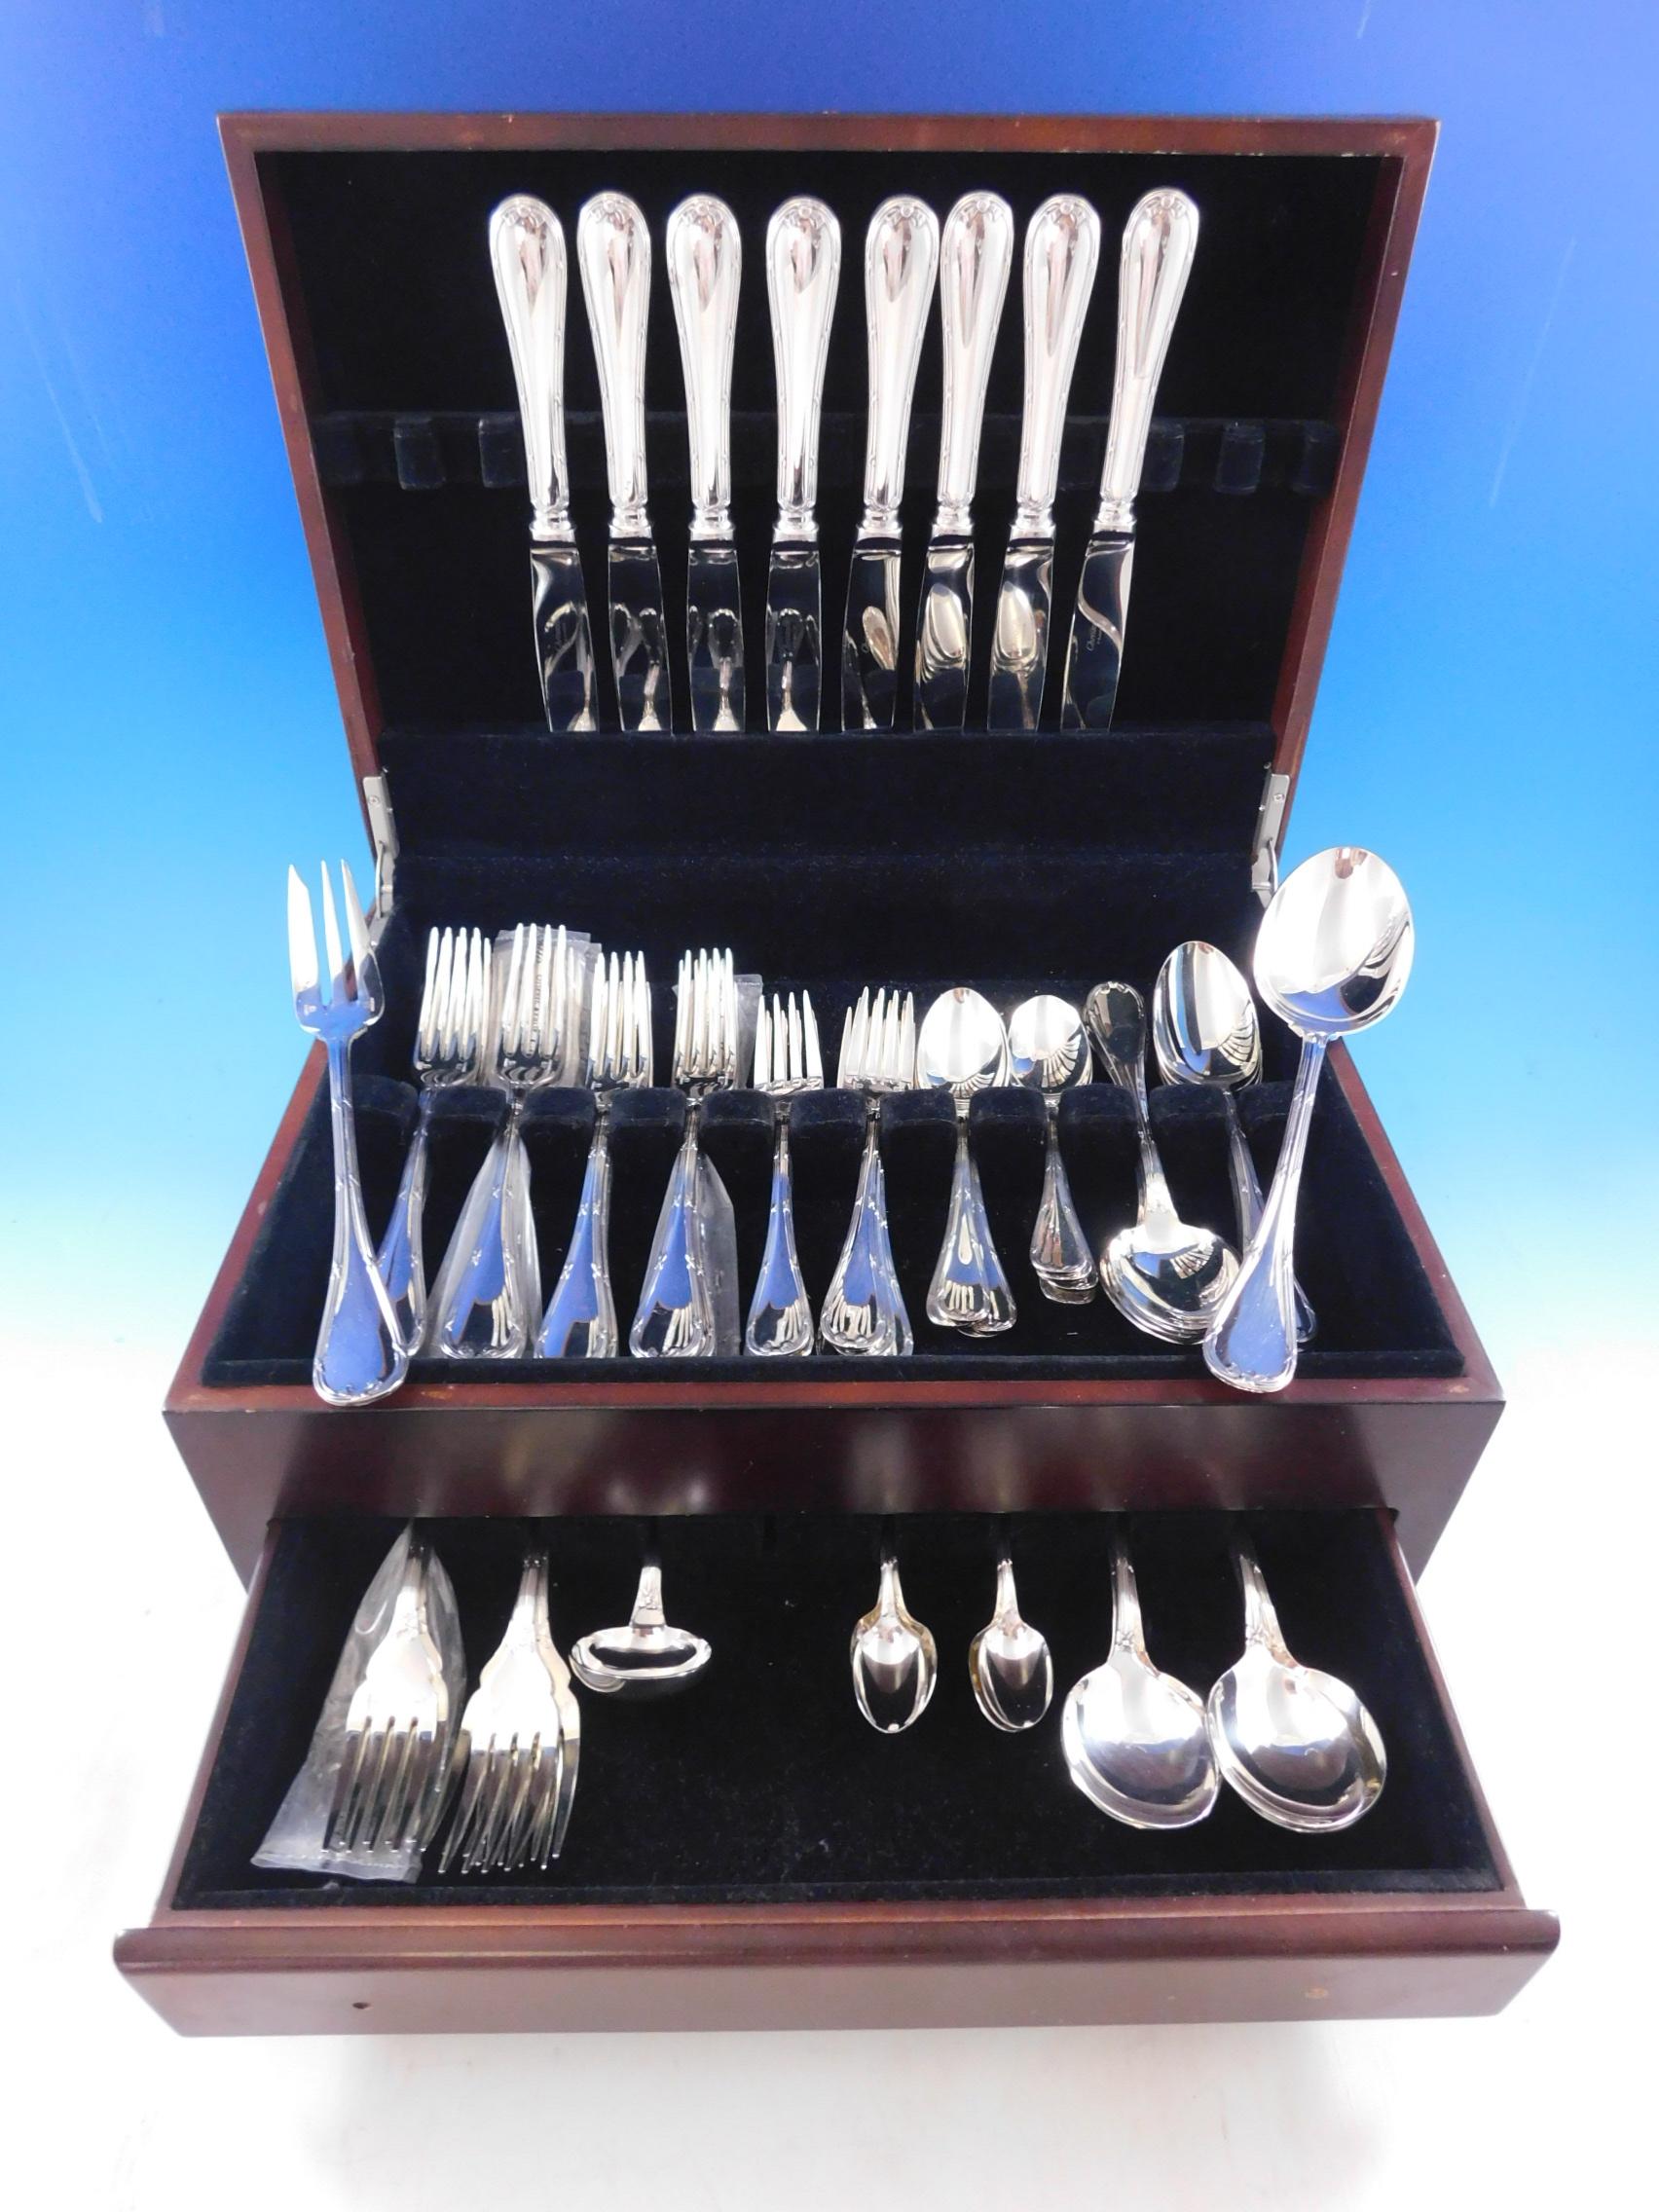 With a dedication to perfection and quality, Christofle flatware creations unite craftsmanship and modern technique, resulting in flatware to be handed down through generations. Created in 1907, Rubans is characterized by symmetrical ornamentation